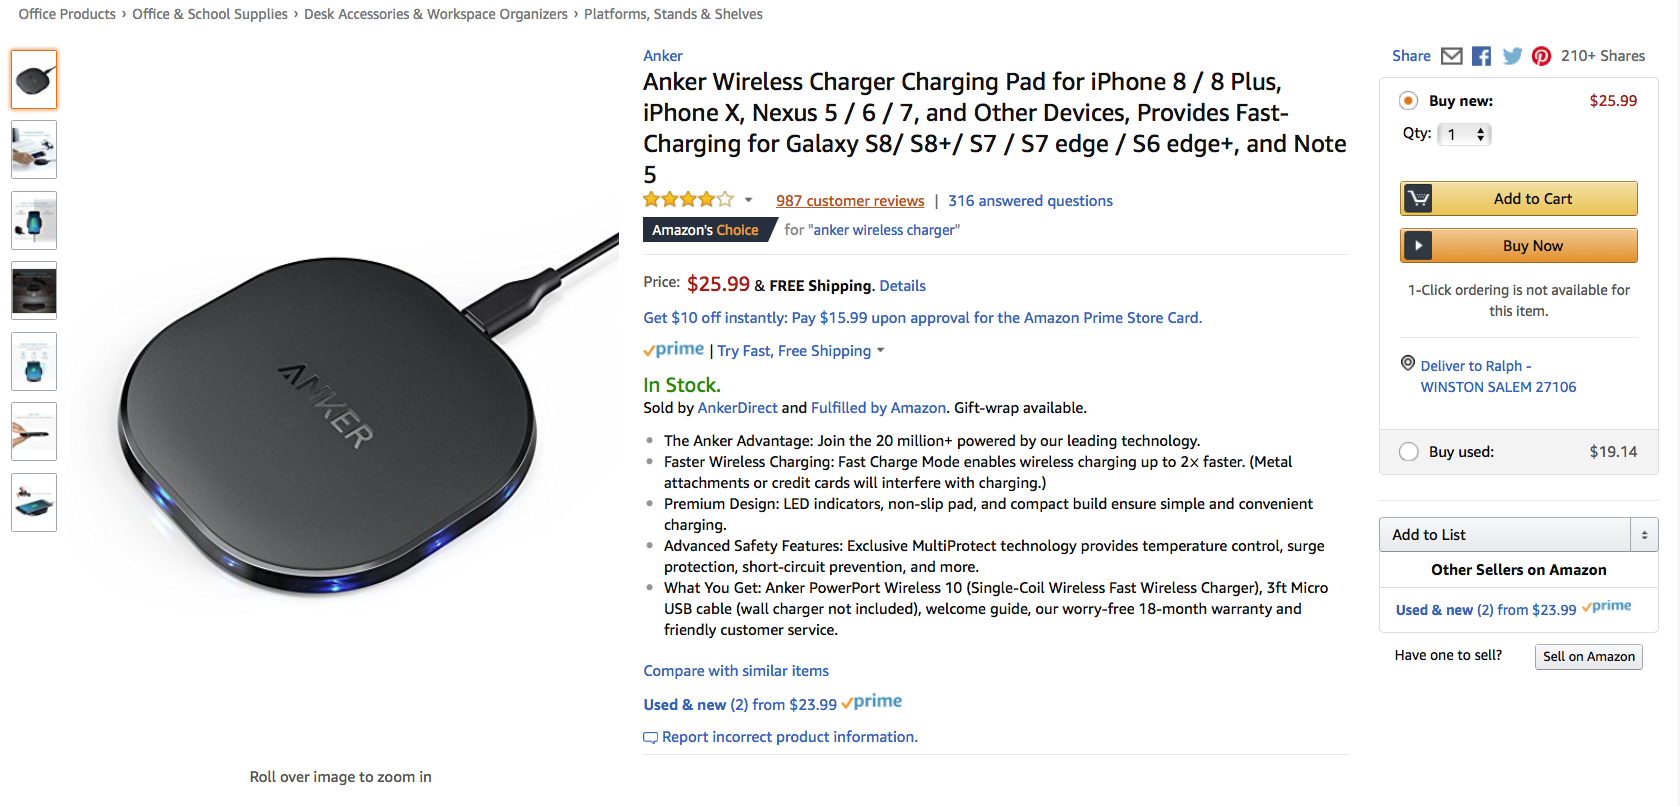 Amazon_Anker Wireless charger